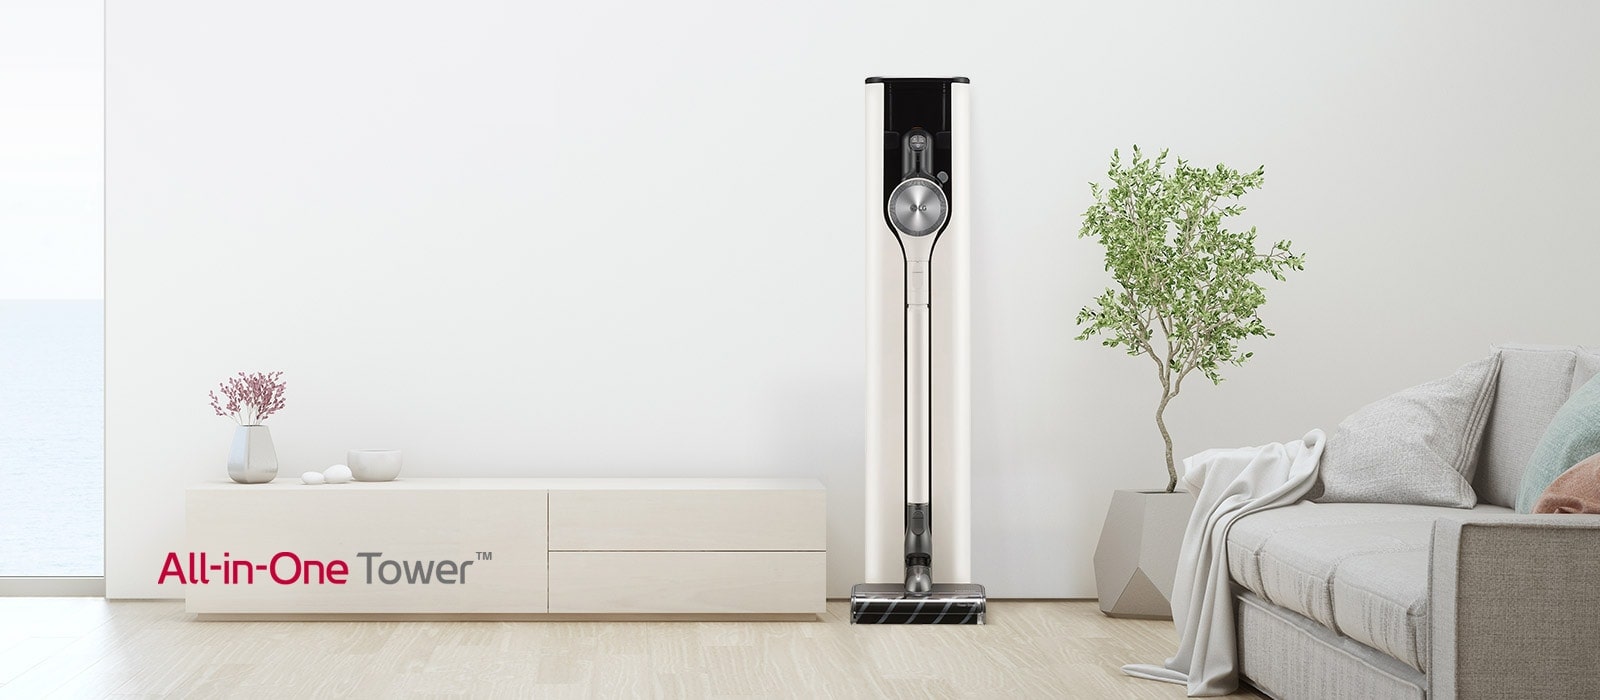 A Sleek Tower that Stores, Empties, and Charges